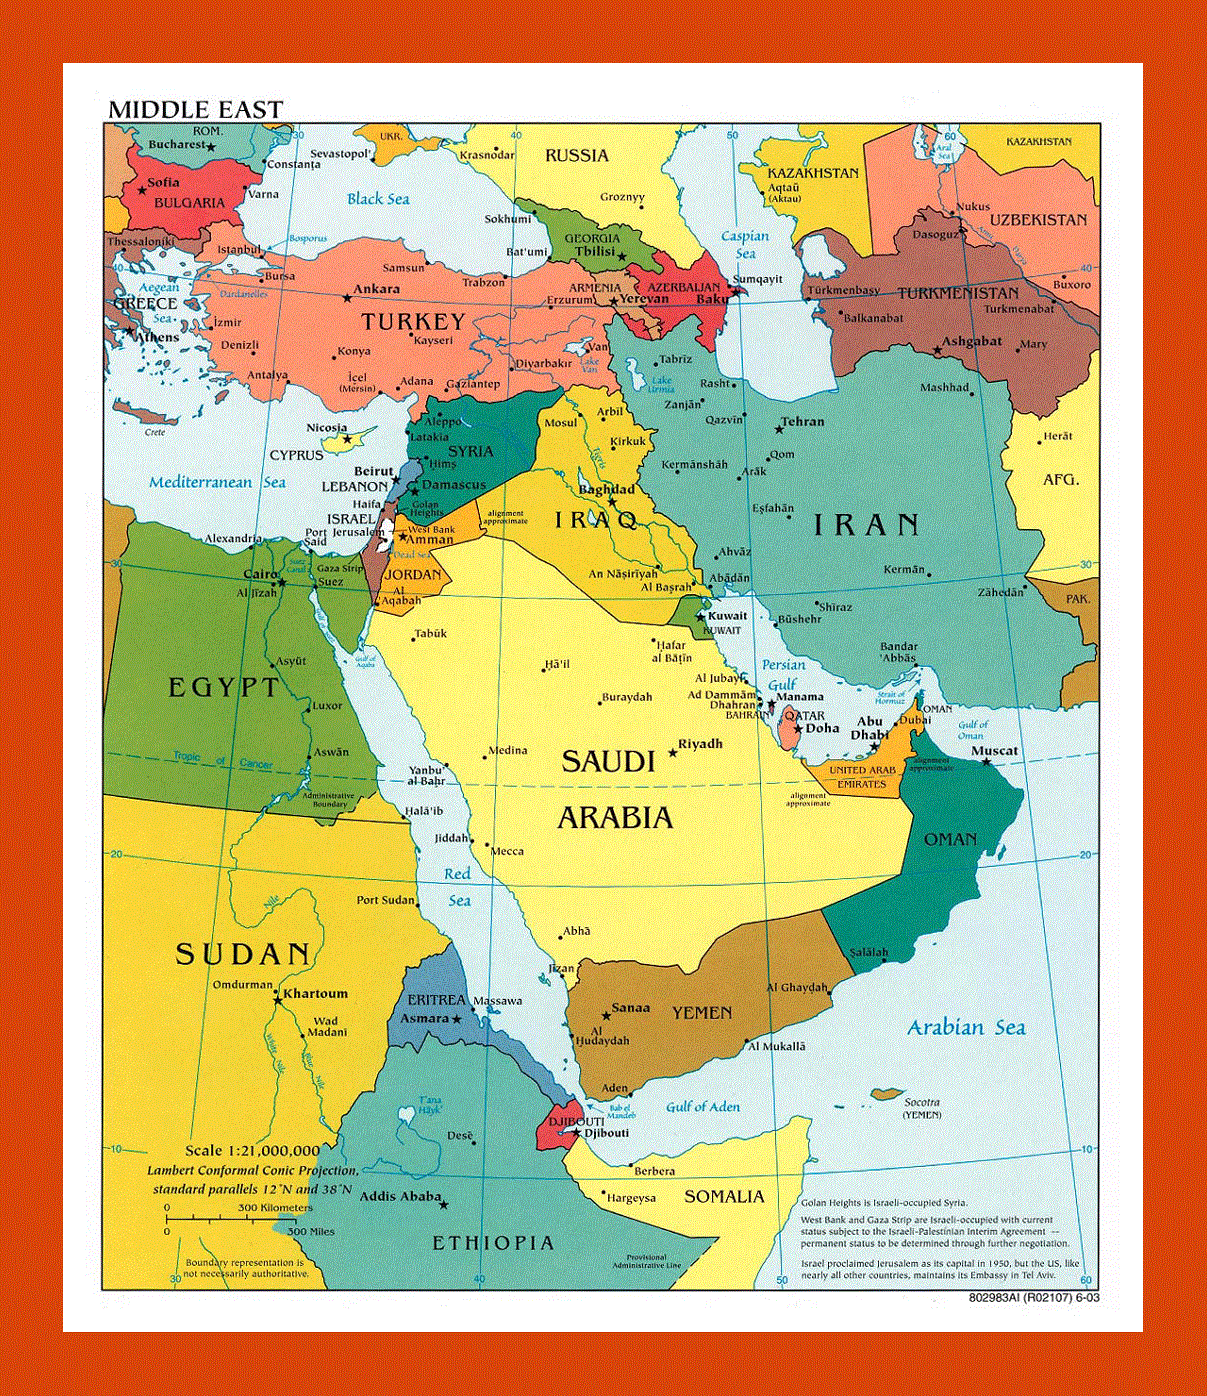 Political map of the Middle East - 2003